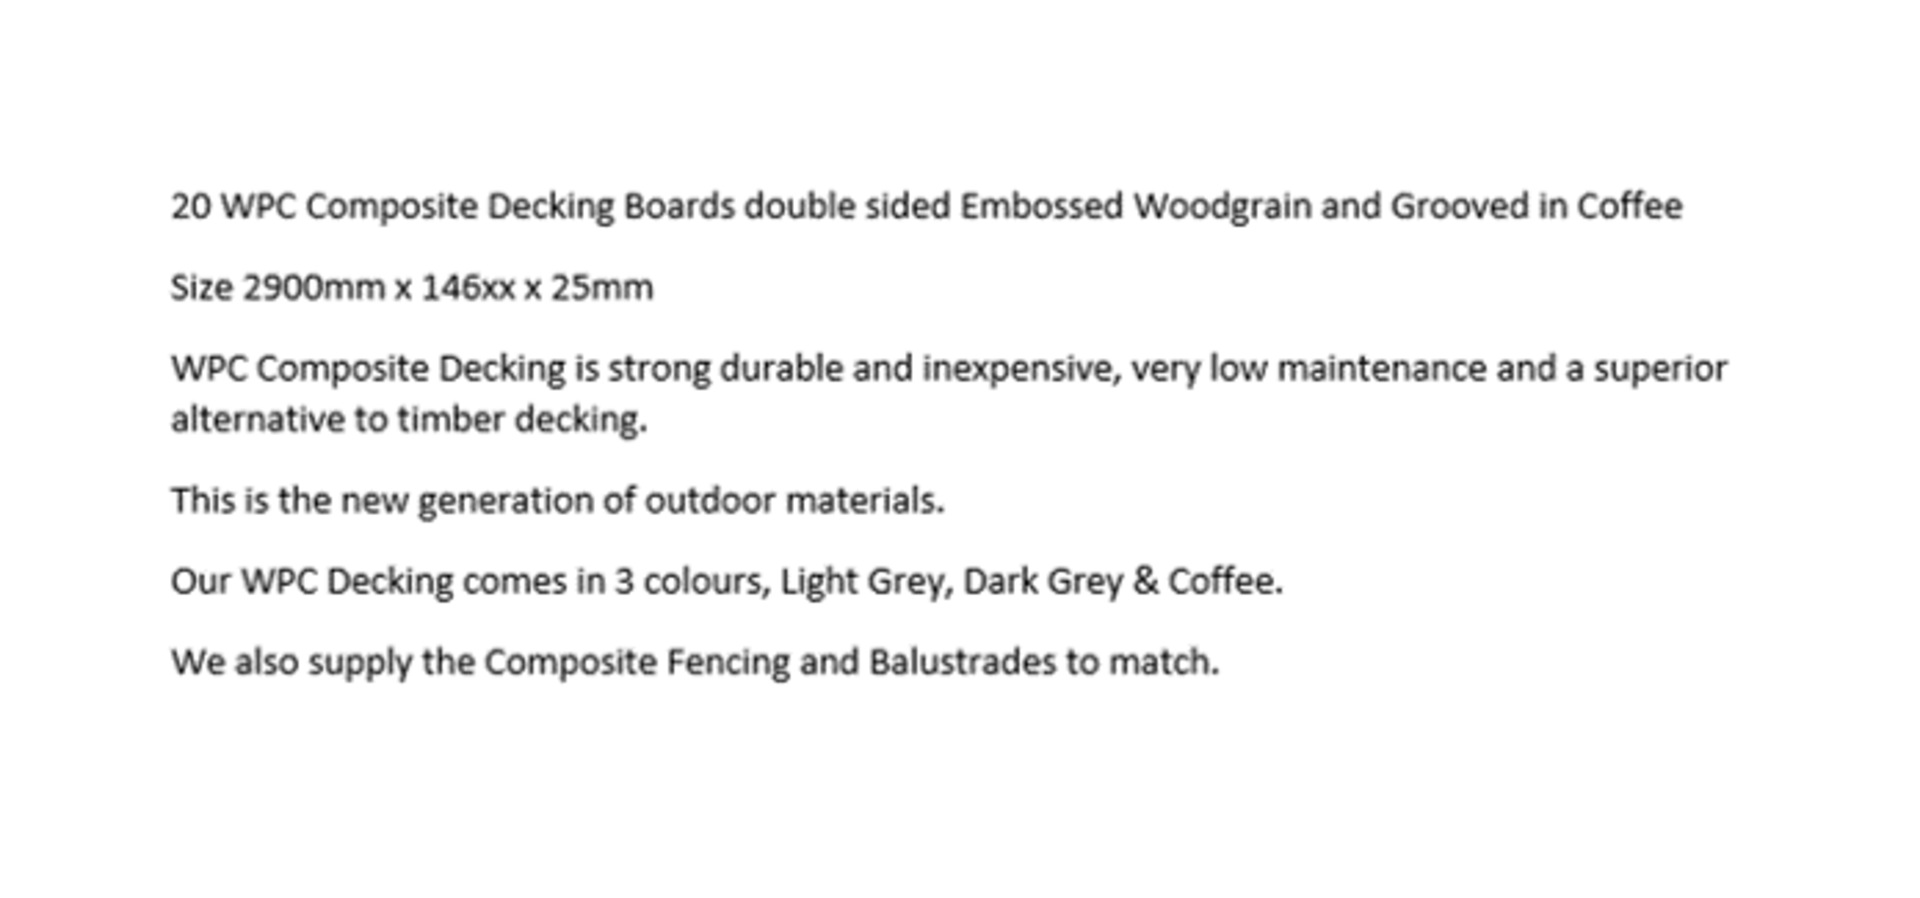 * 20 WPC Composite Coffee Double sided Embossed Woodgrain Decking Boards 2900mm x 146mm x 25mm - Image 5 of 5